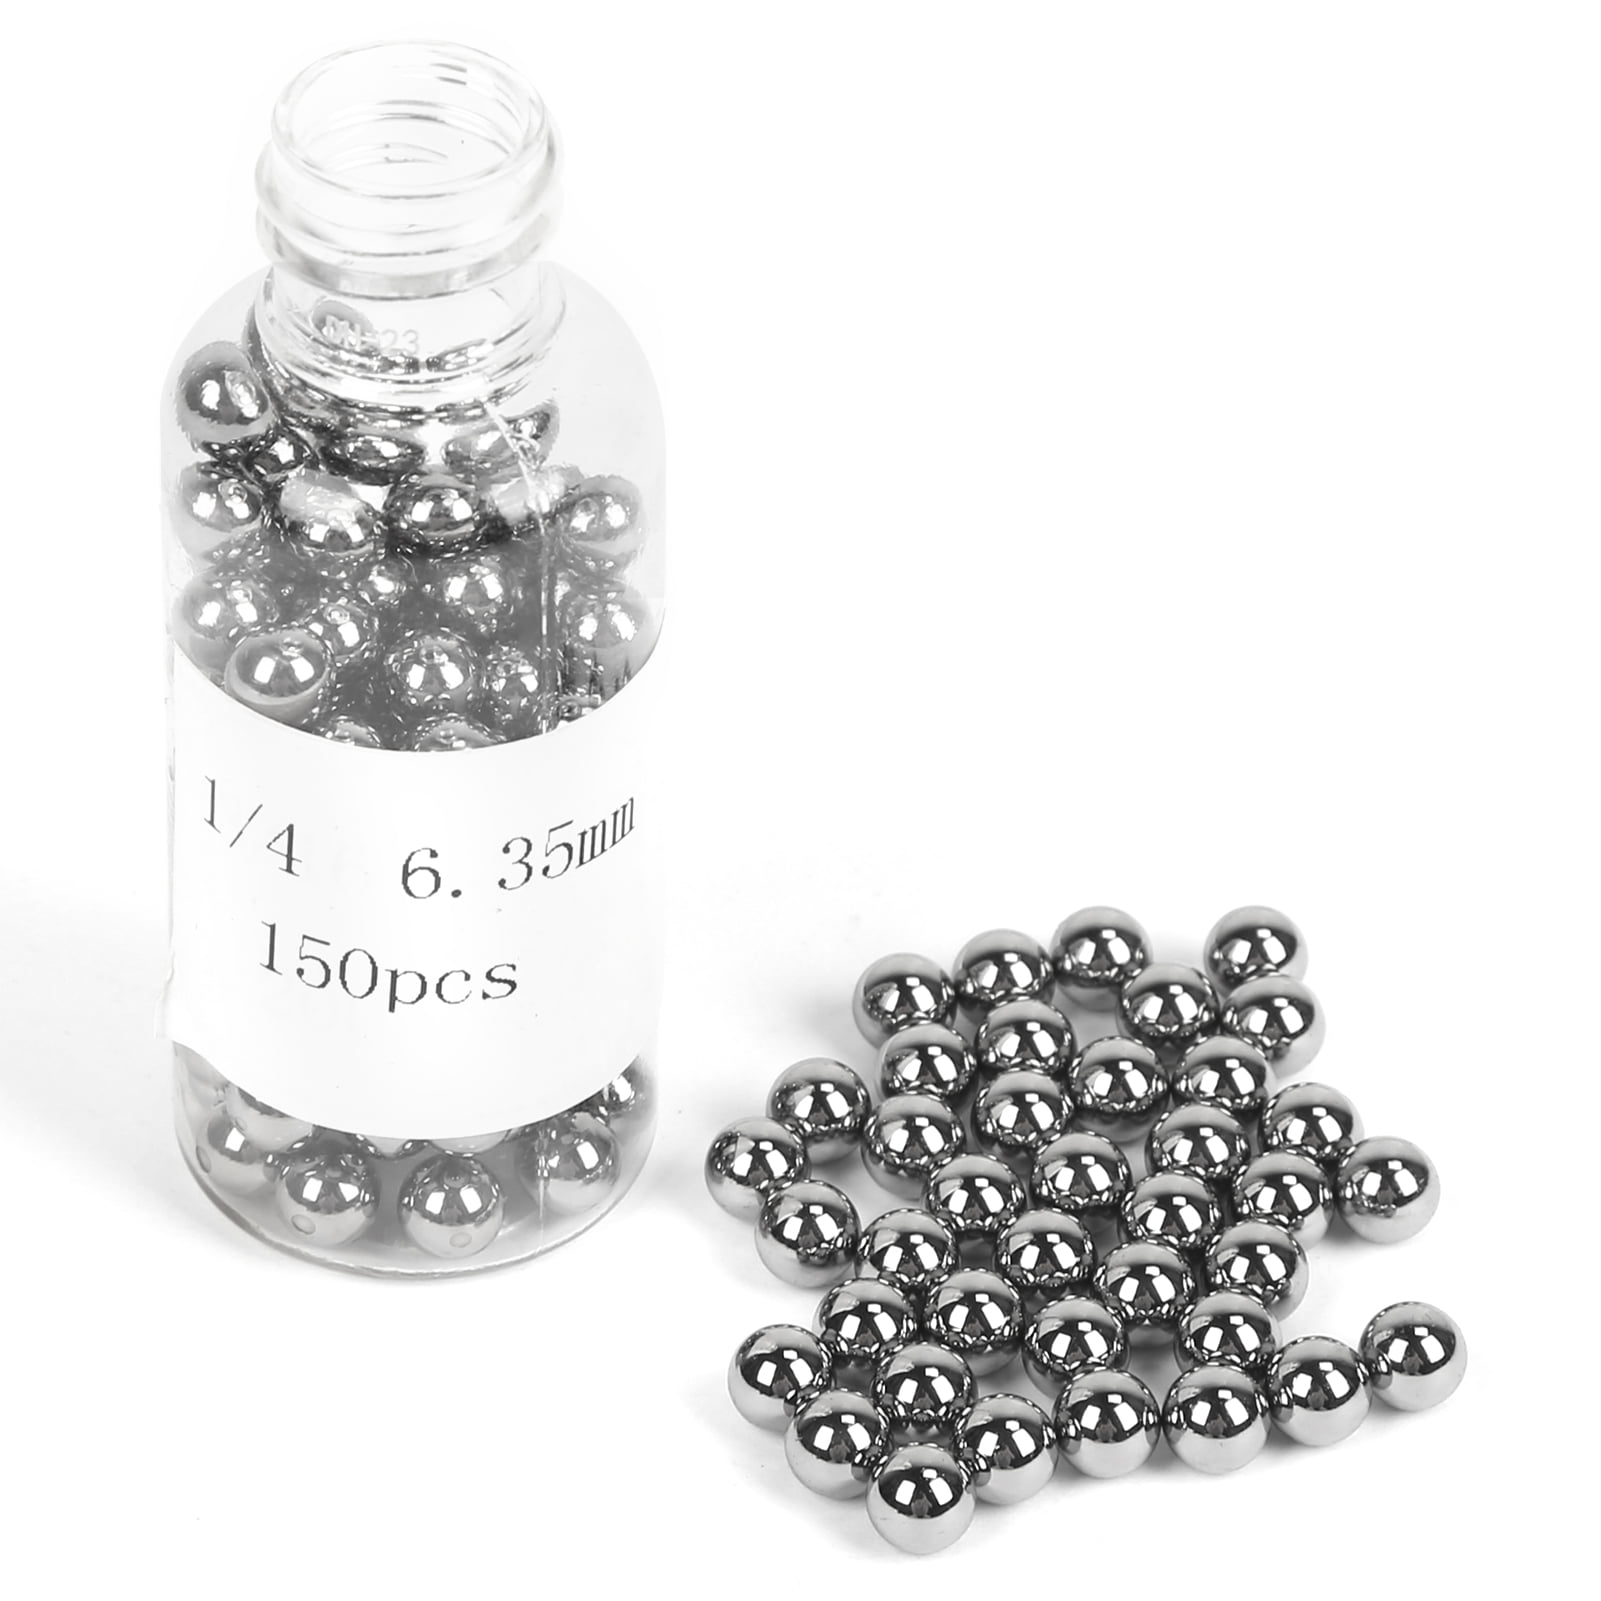 150Pcs Bicycle Bearing Ball Stainless Steel Industrial Hardware Accessories 1/4" 